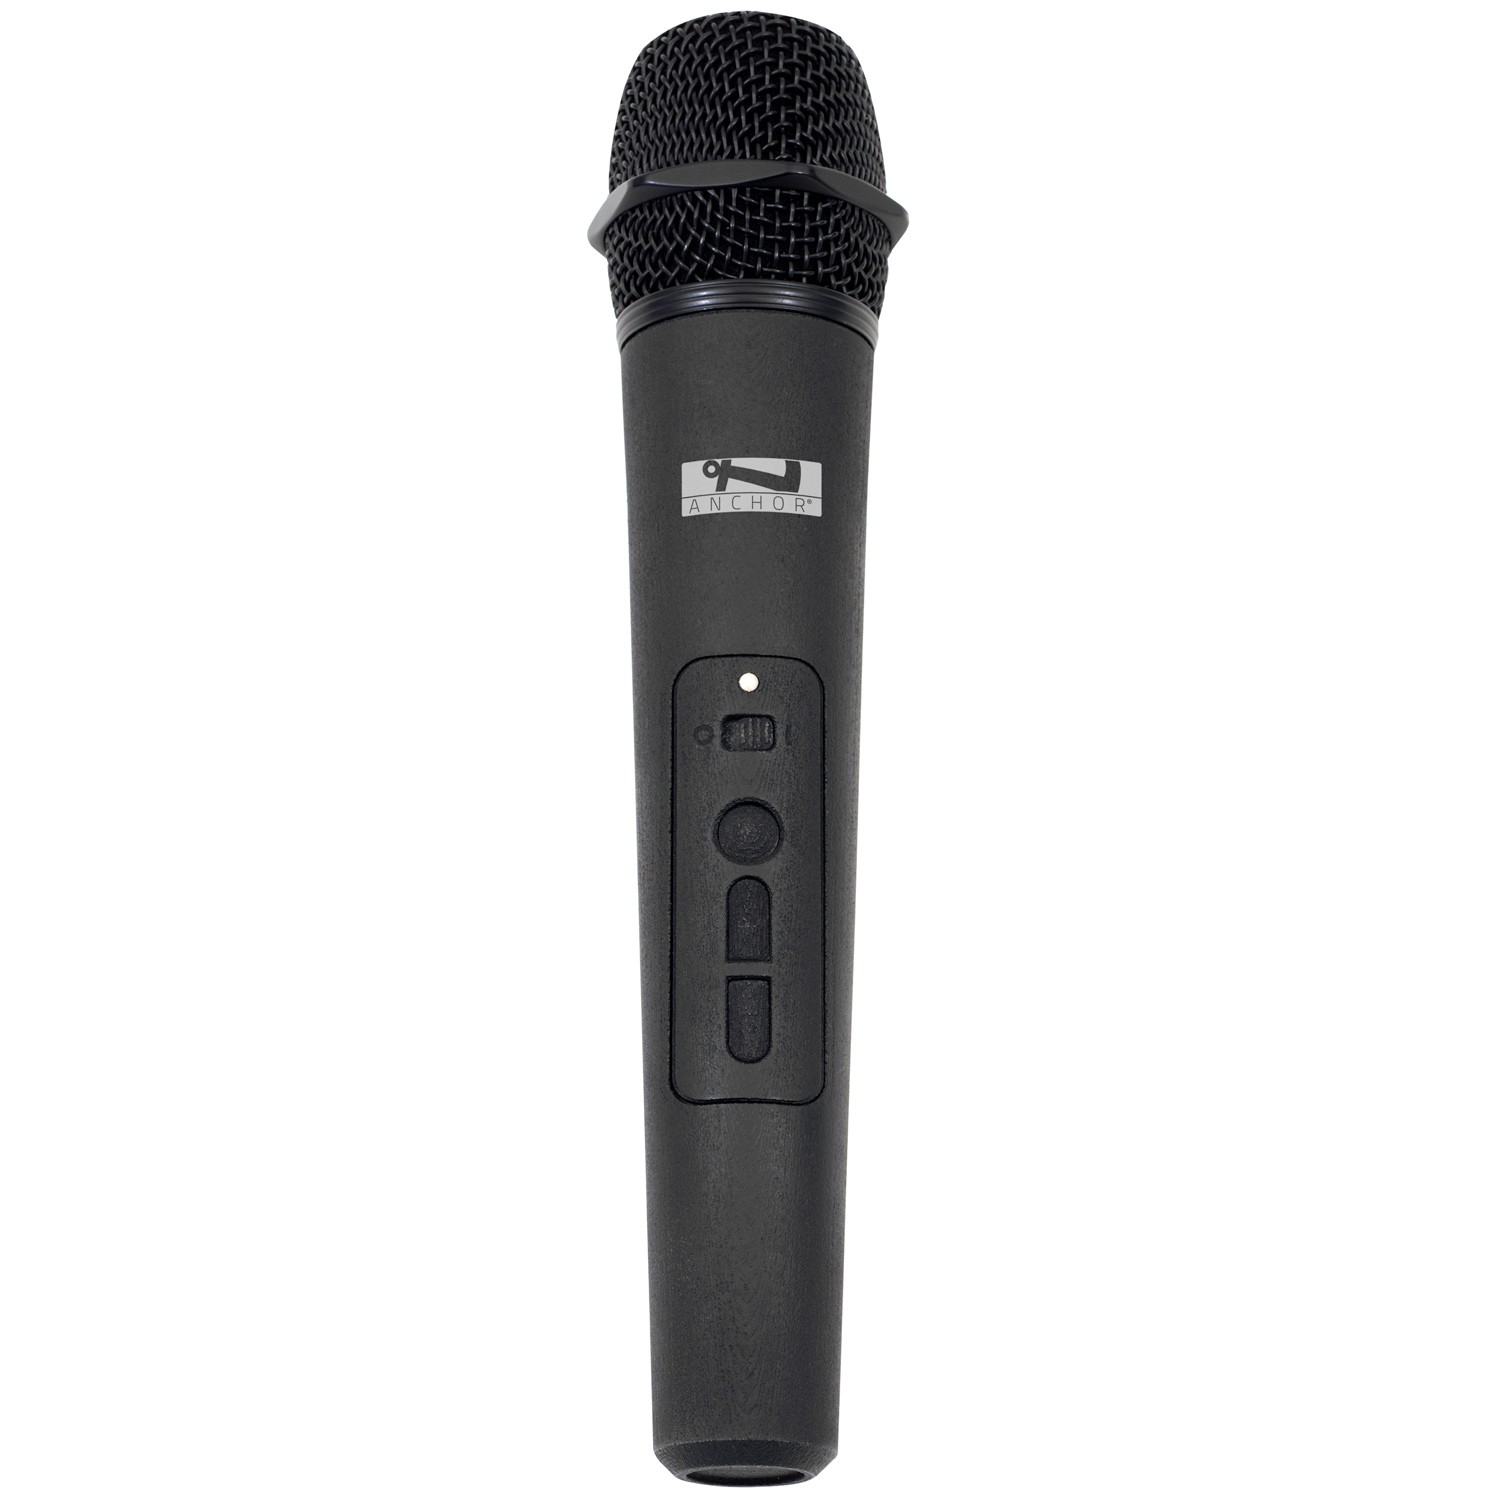 Anchor Audio WH-LINK Handheld Microphone